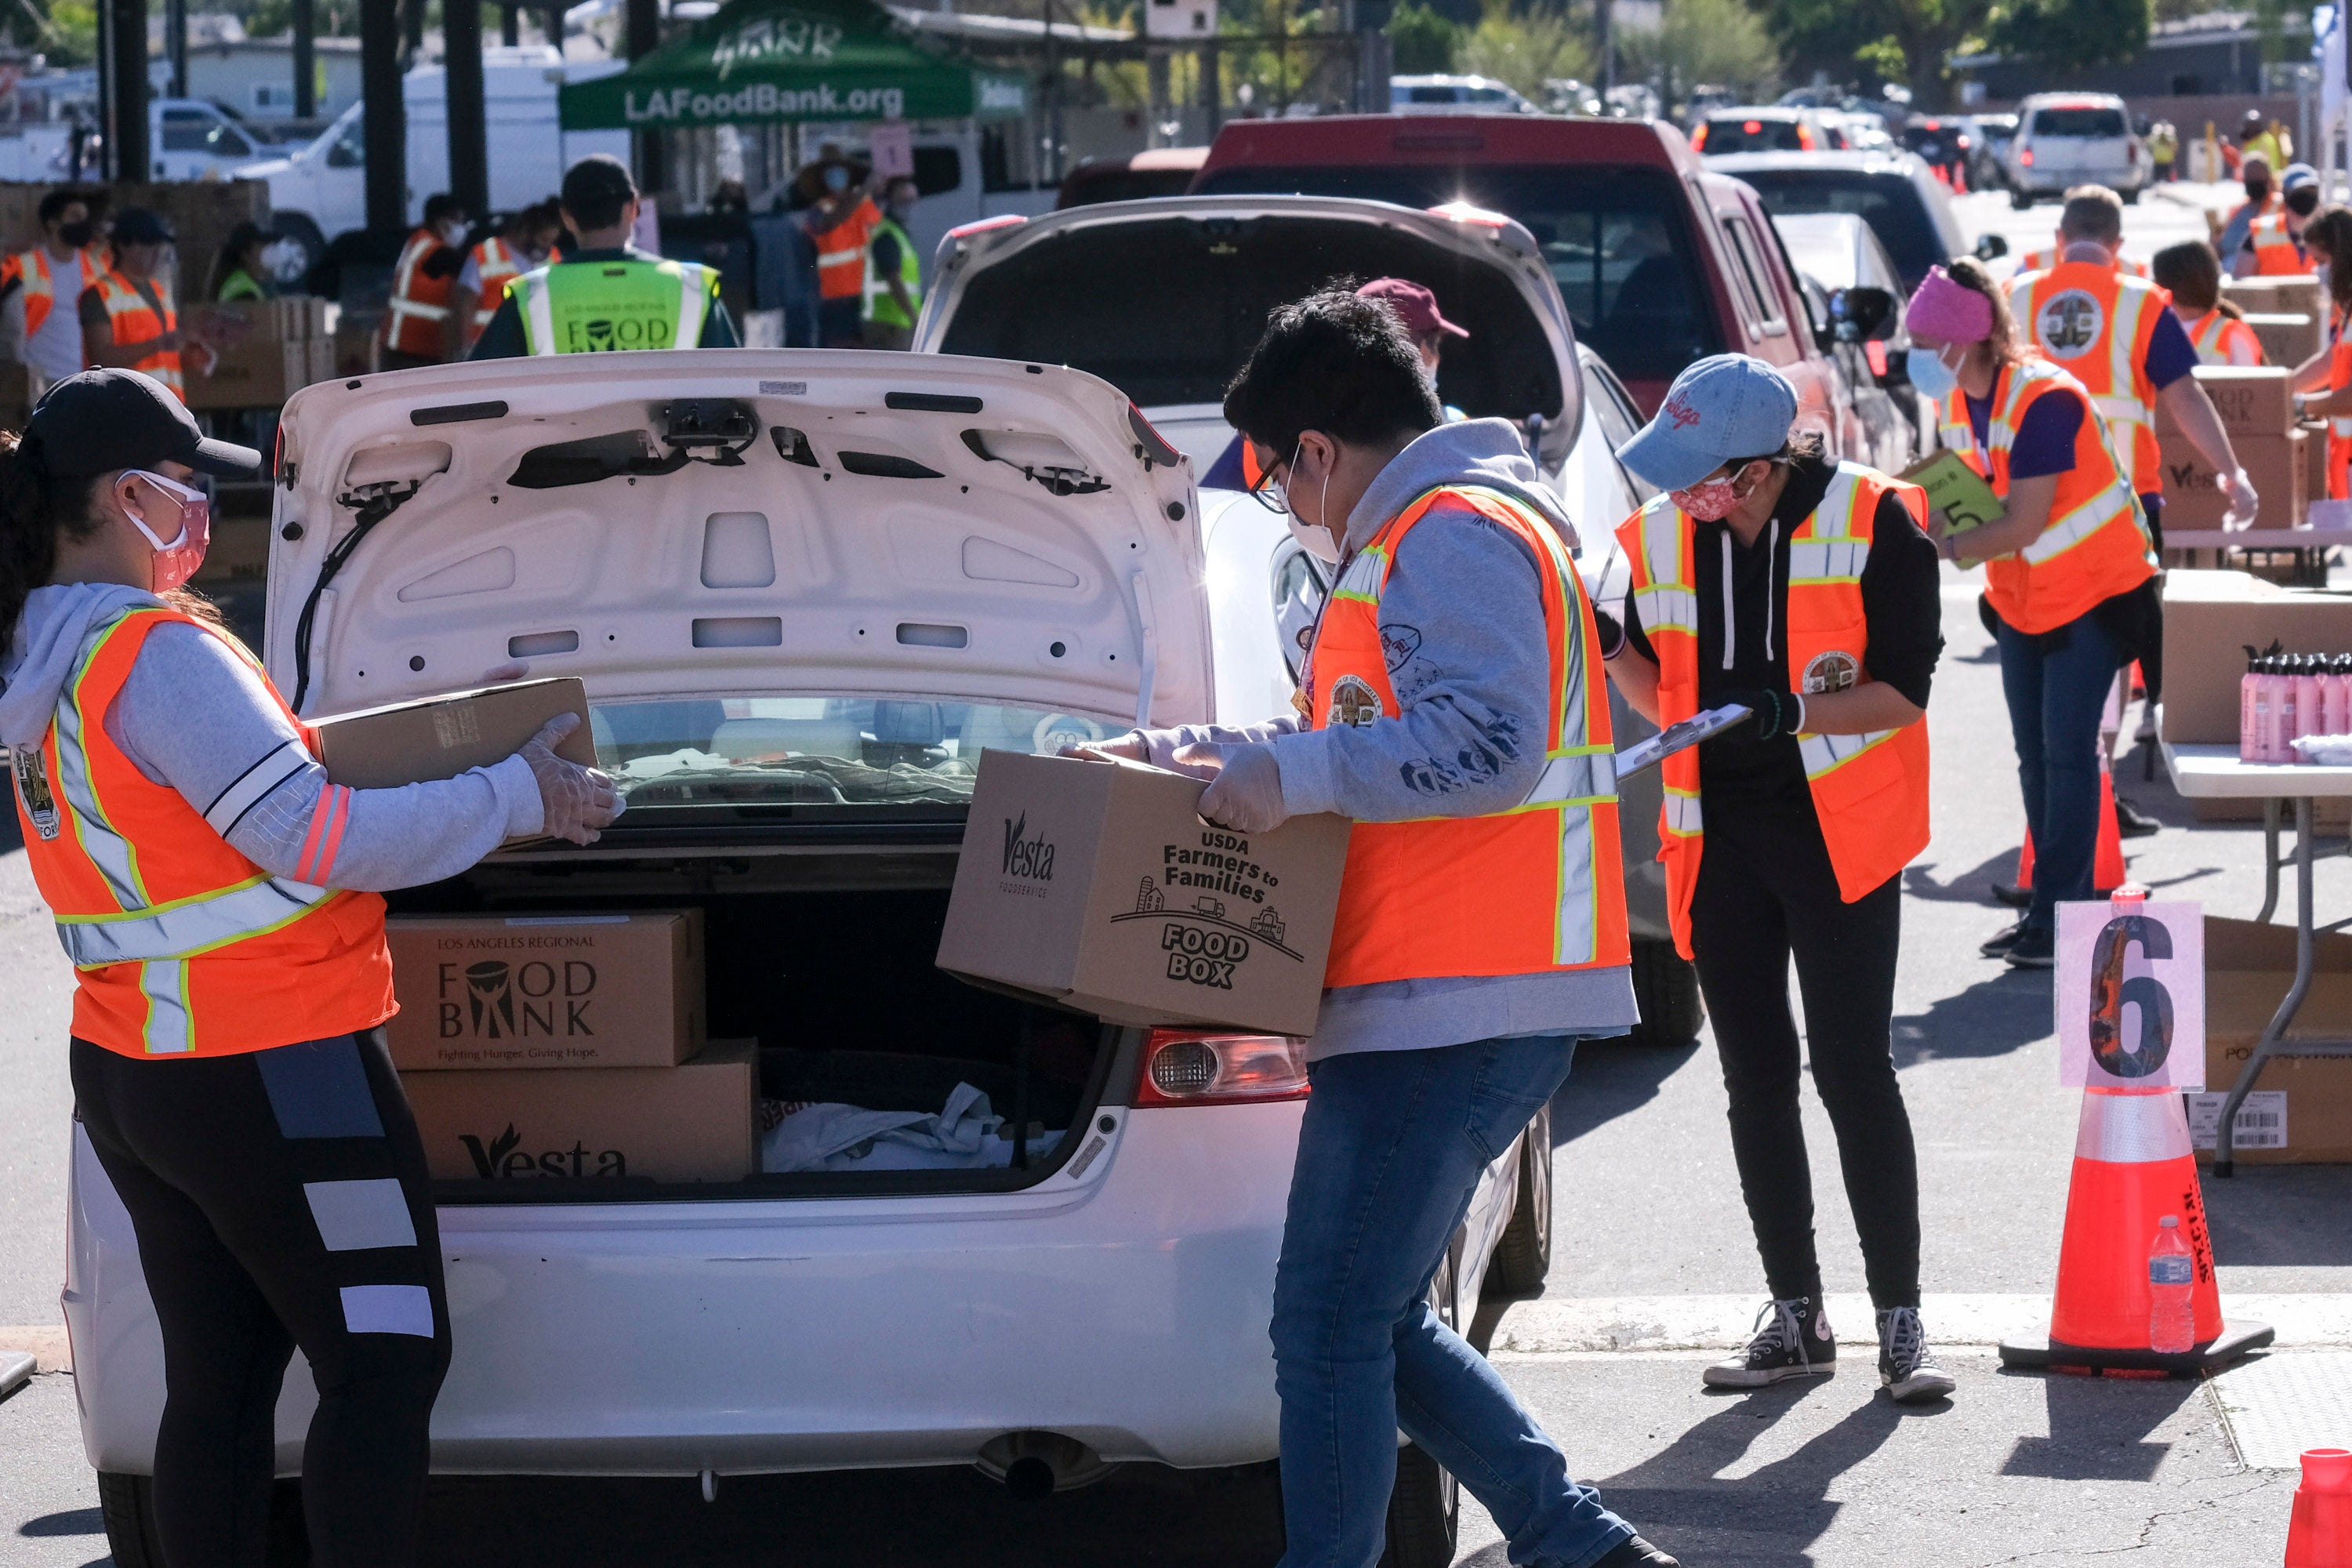 Volunteers load food into the trunk of vehicles during a ''Let's Feed LA County'' drive-thru food distribution by the Los Angeles Regional Food Bank and the office of Supervisor Hilda Solis on February 23, 2021, in La Puente, California.